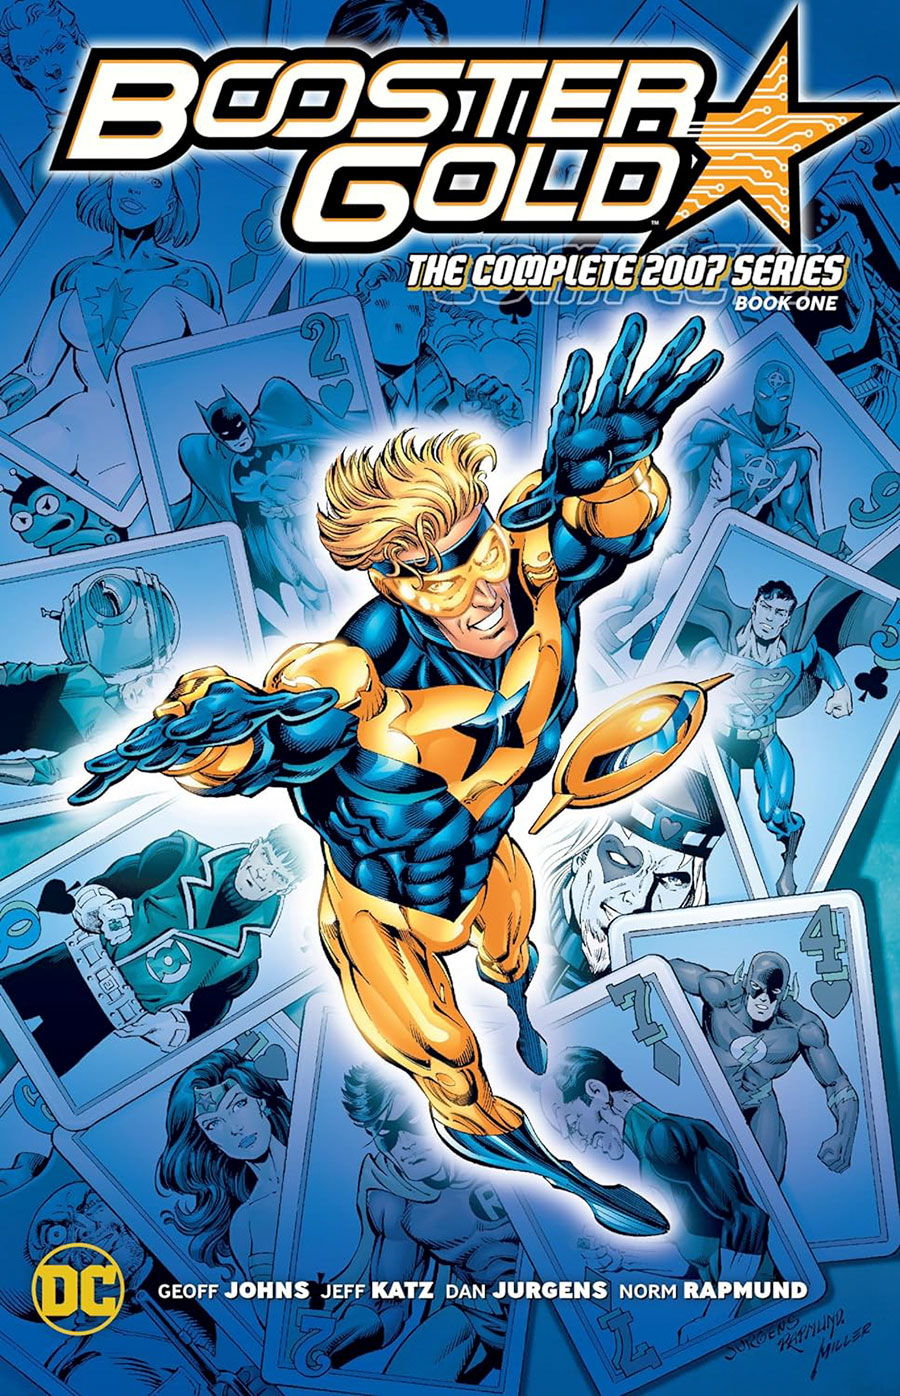 Booster Gold The Complete 2007 Series Book 1 TP